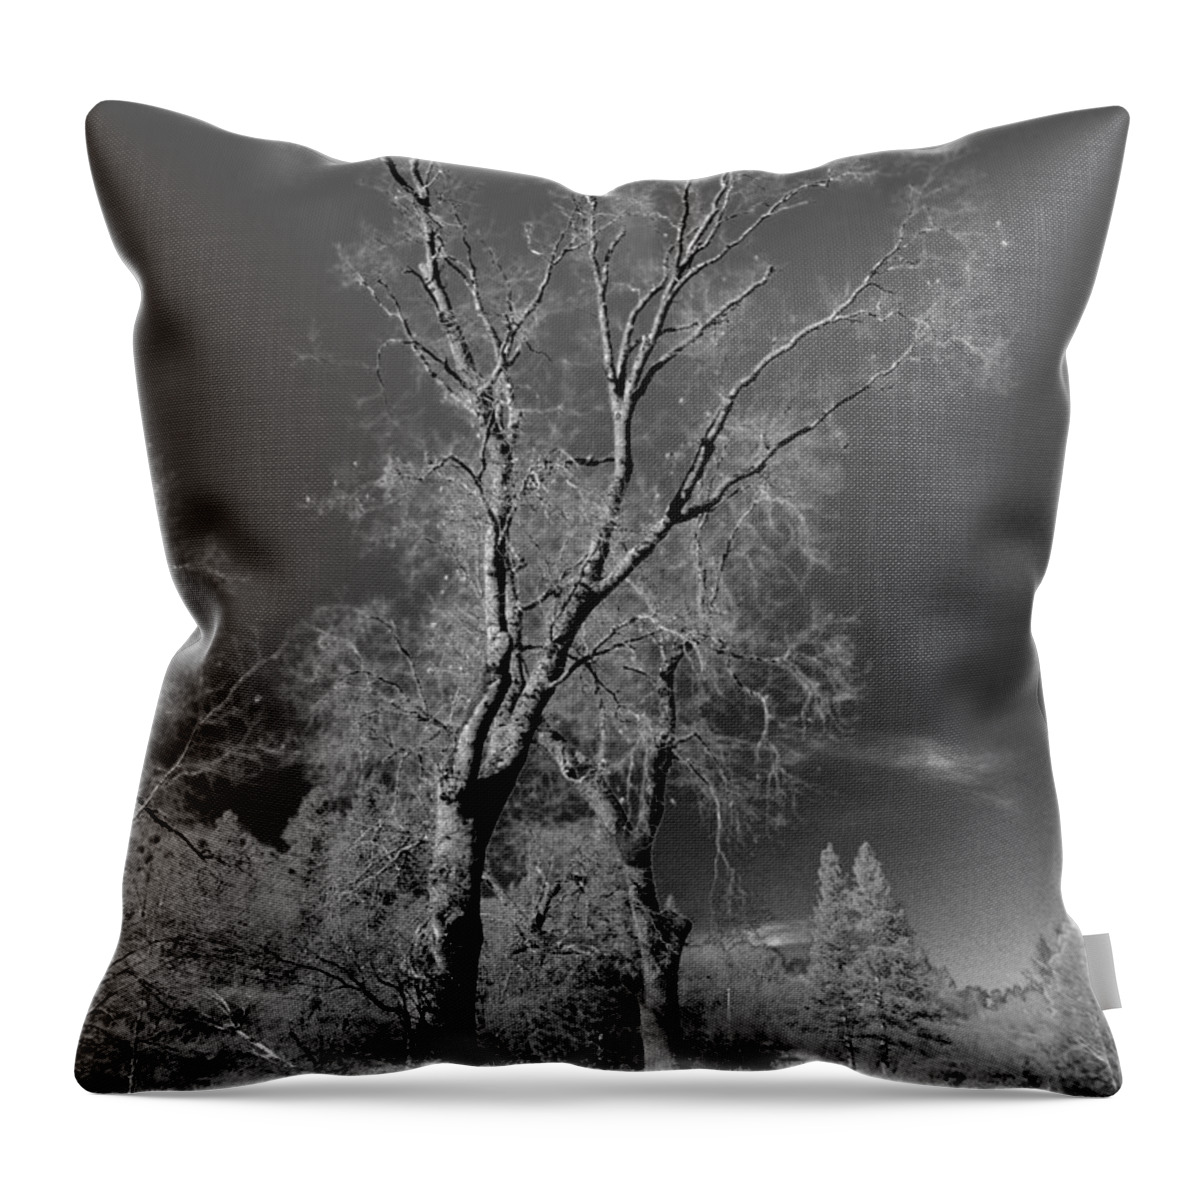 Photograph Throw Pillow featuring the photograph Oak Tree by Beverly Read